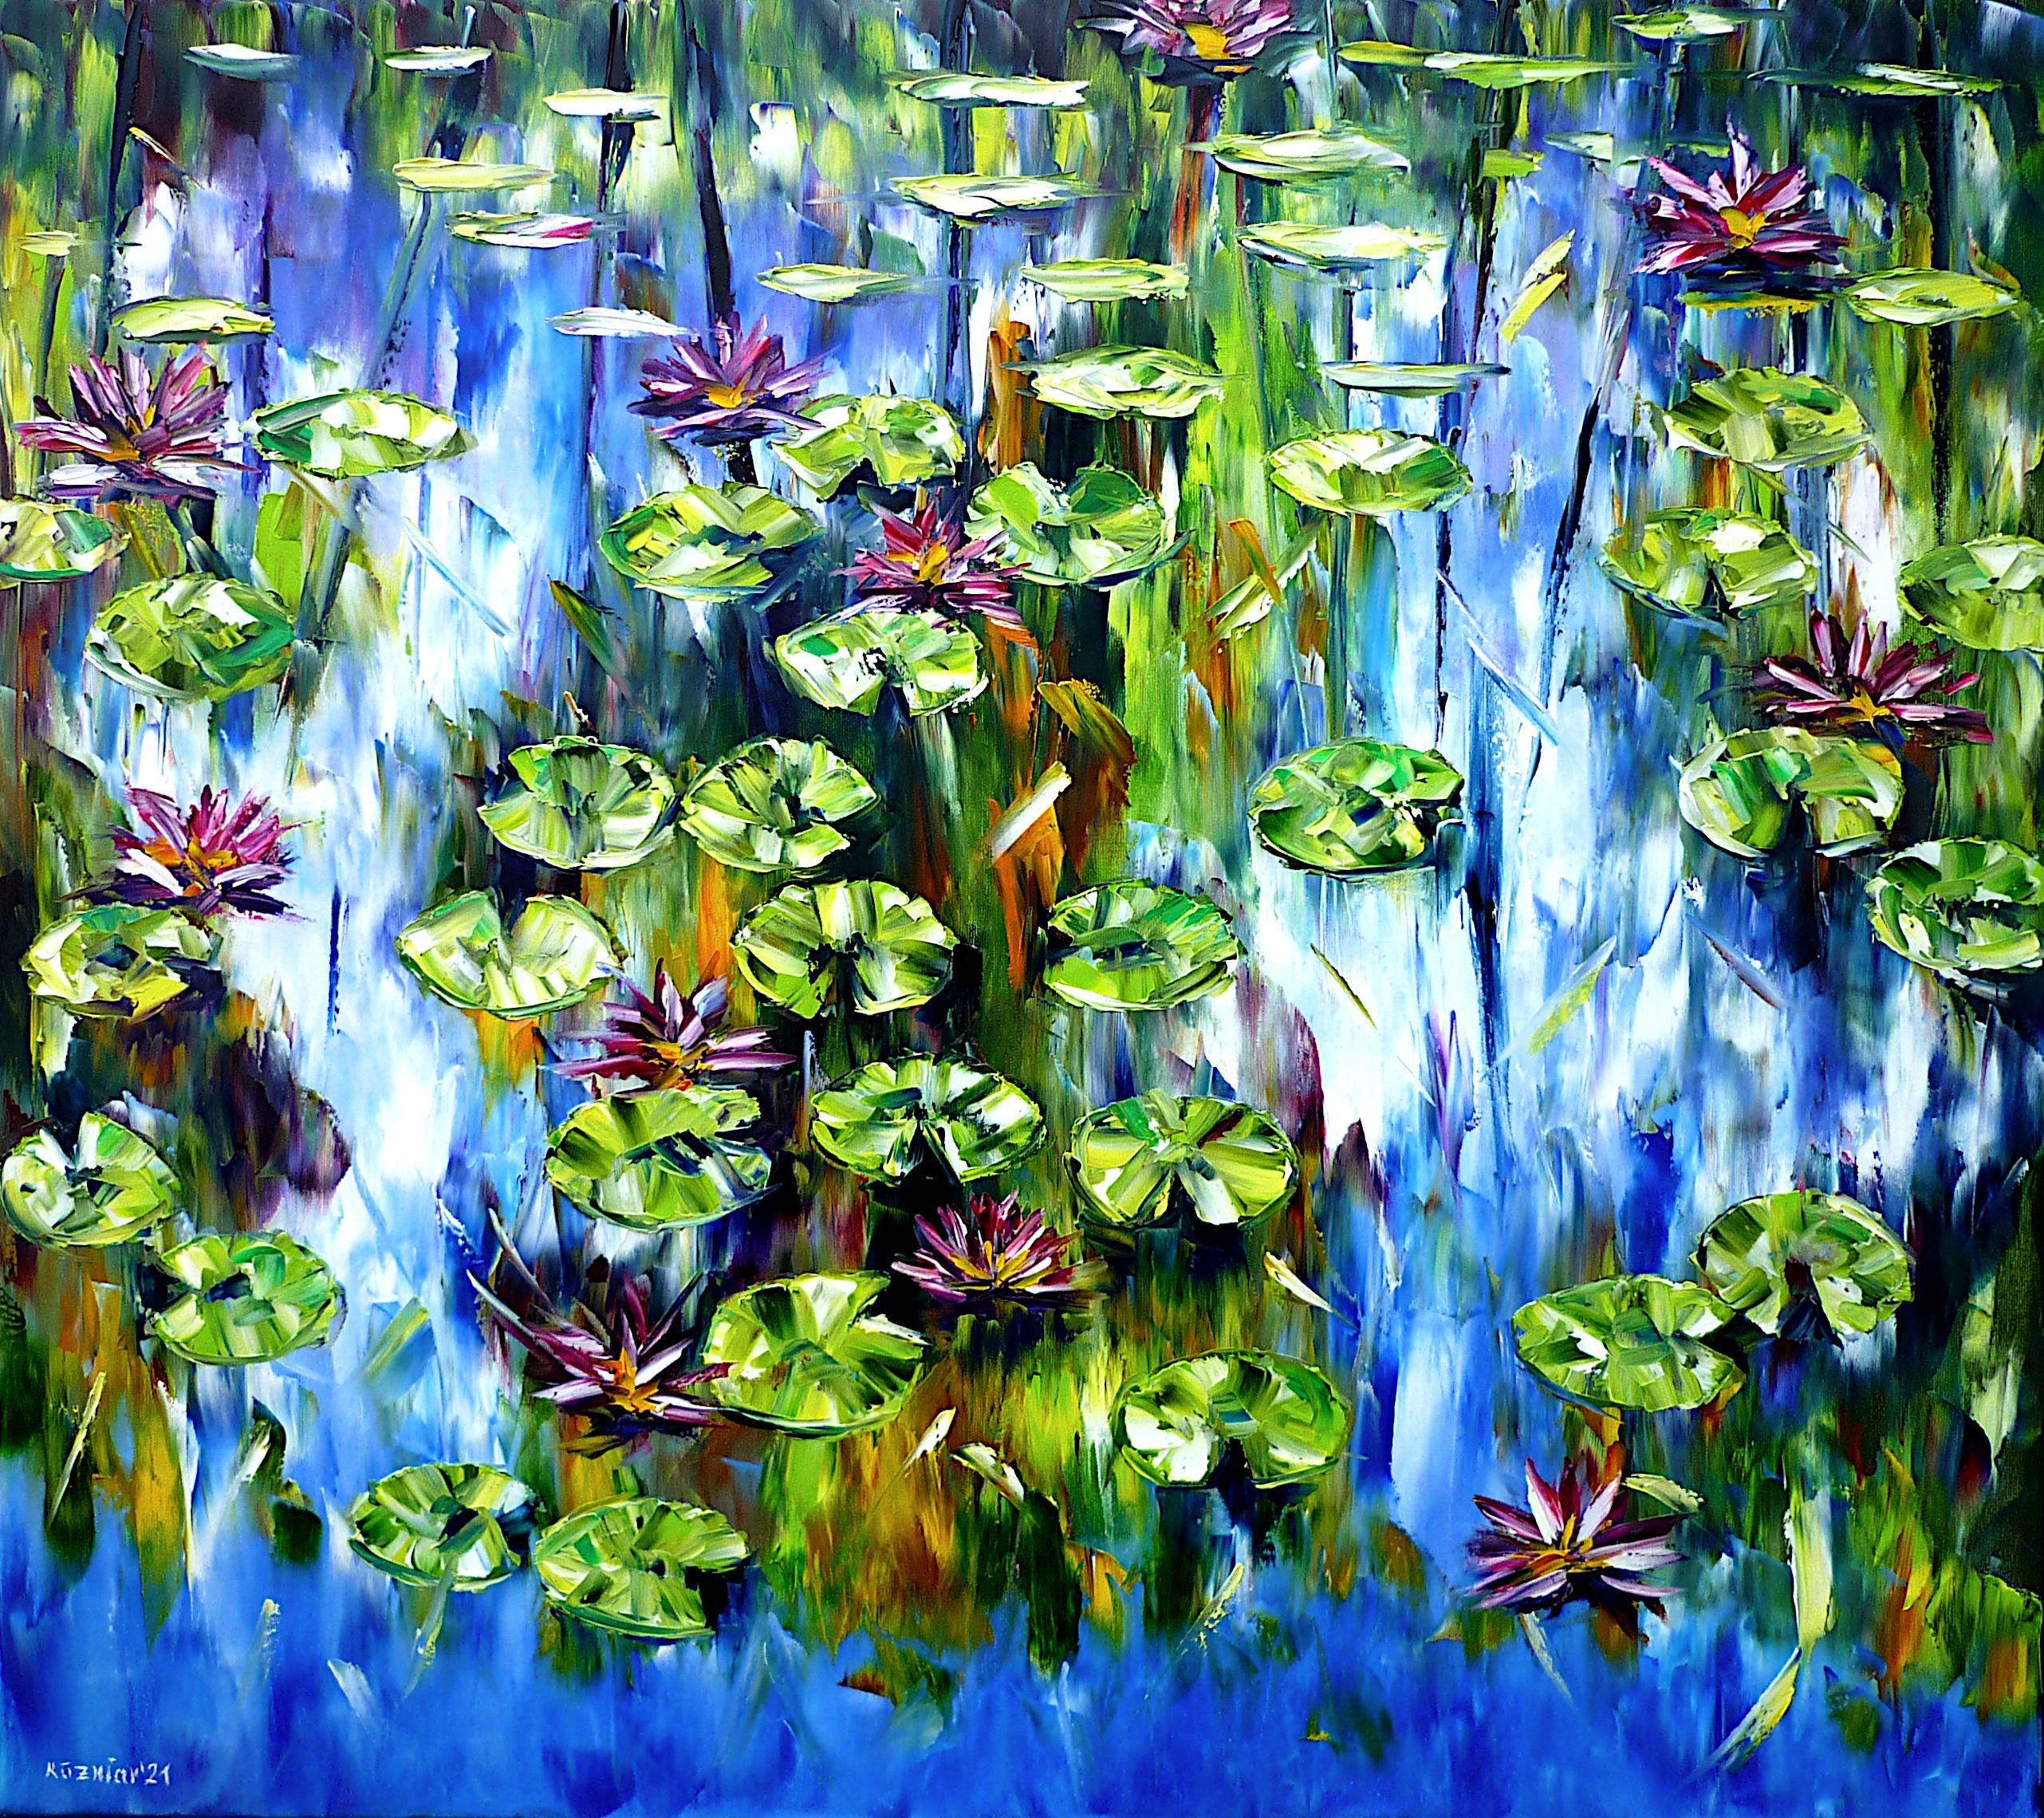 lily pond,pond painting,lilies on the water,water flowers,claude monet,garden pond,pond in the garden,garden painting,rose pond,sky reflection,cloud reflections in the water,flowers in the water,flowers in the pond,flower pond,blue-green picture,blue-green painting,joy,friendly picture,friendly painting,peace,peaceful picture,peaceful painting,palette knife oil painting,modernart,impressionism,expressionism,figurative,abstract painting,lively colours,colorful painting,bright colors,light reflections,impasto painting,living room art,living room picture,living room painting